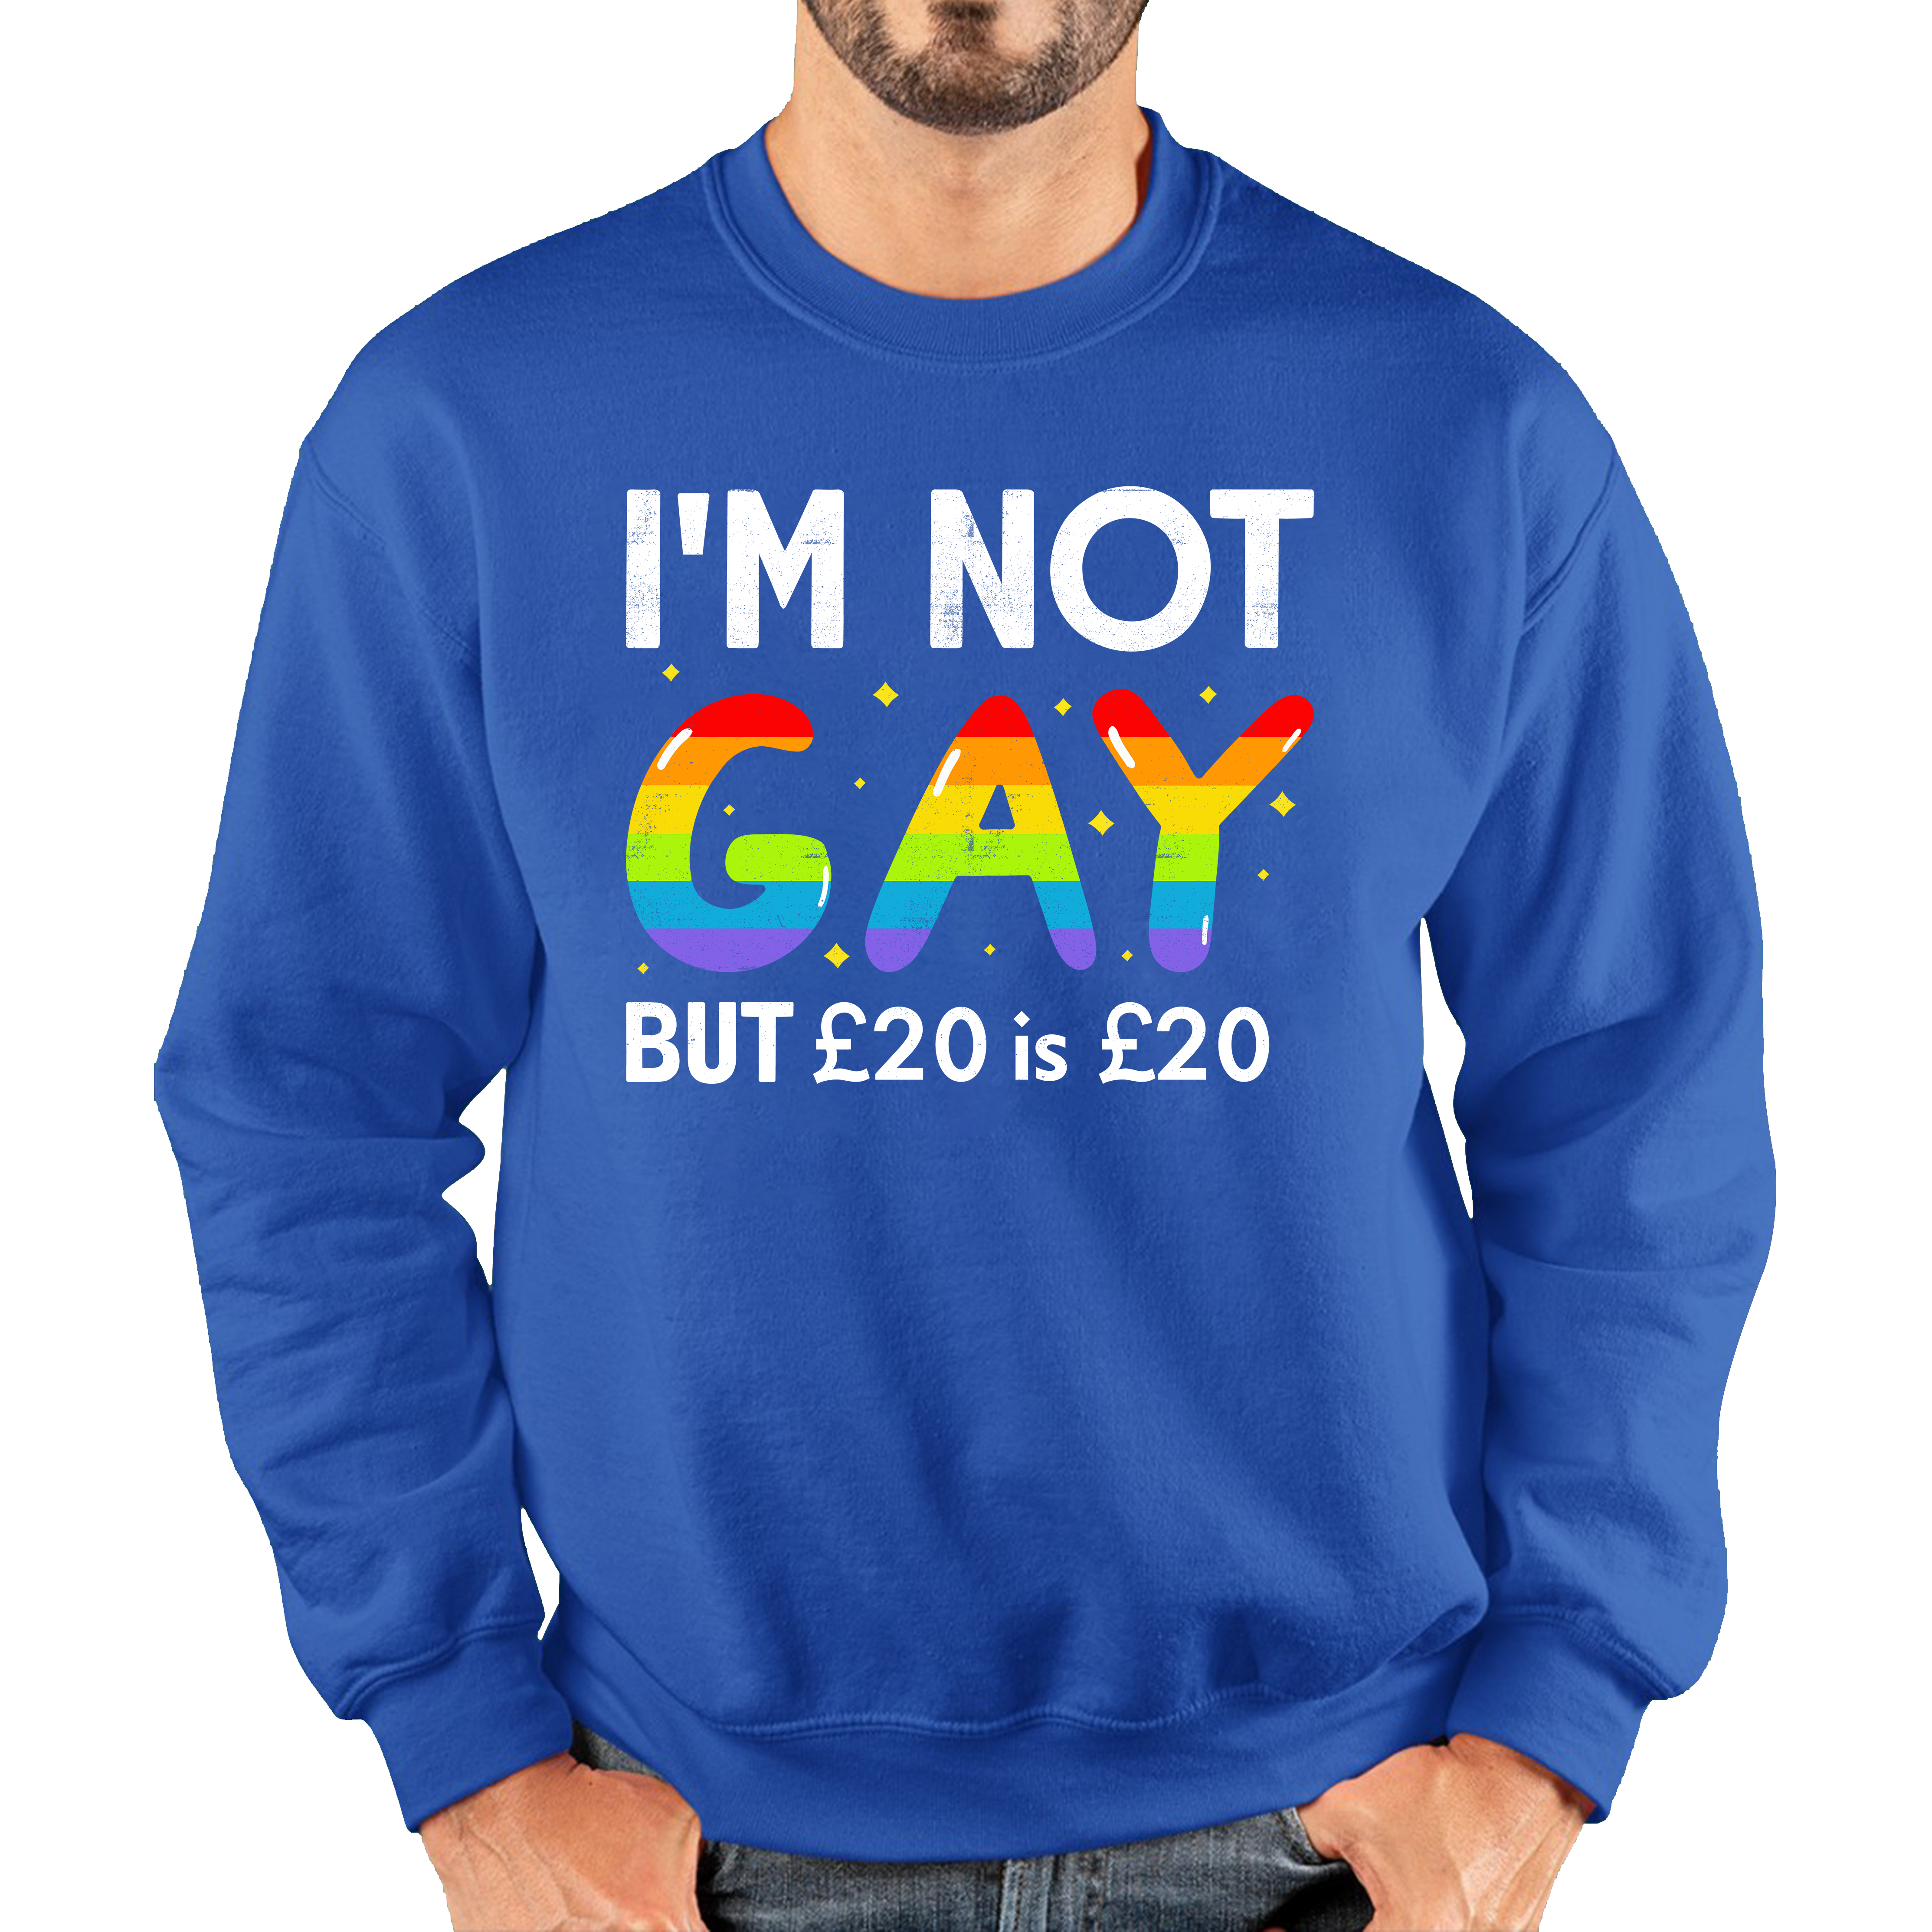 I'm Not Gay But 20 Pounds Is 20 Pounds Jumper Funny LGBT Gay Pride Joke Adult Sweatshirt